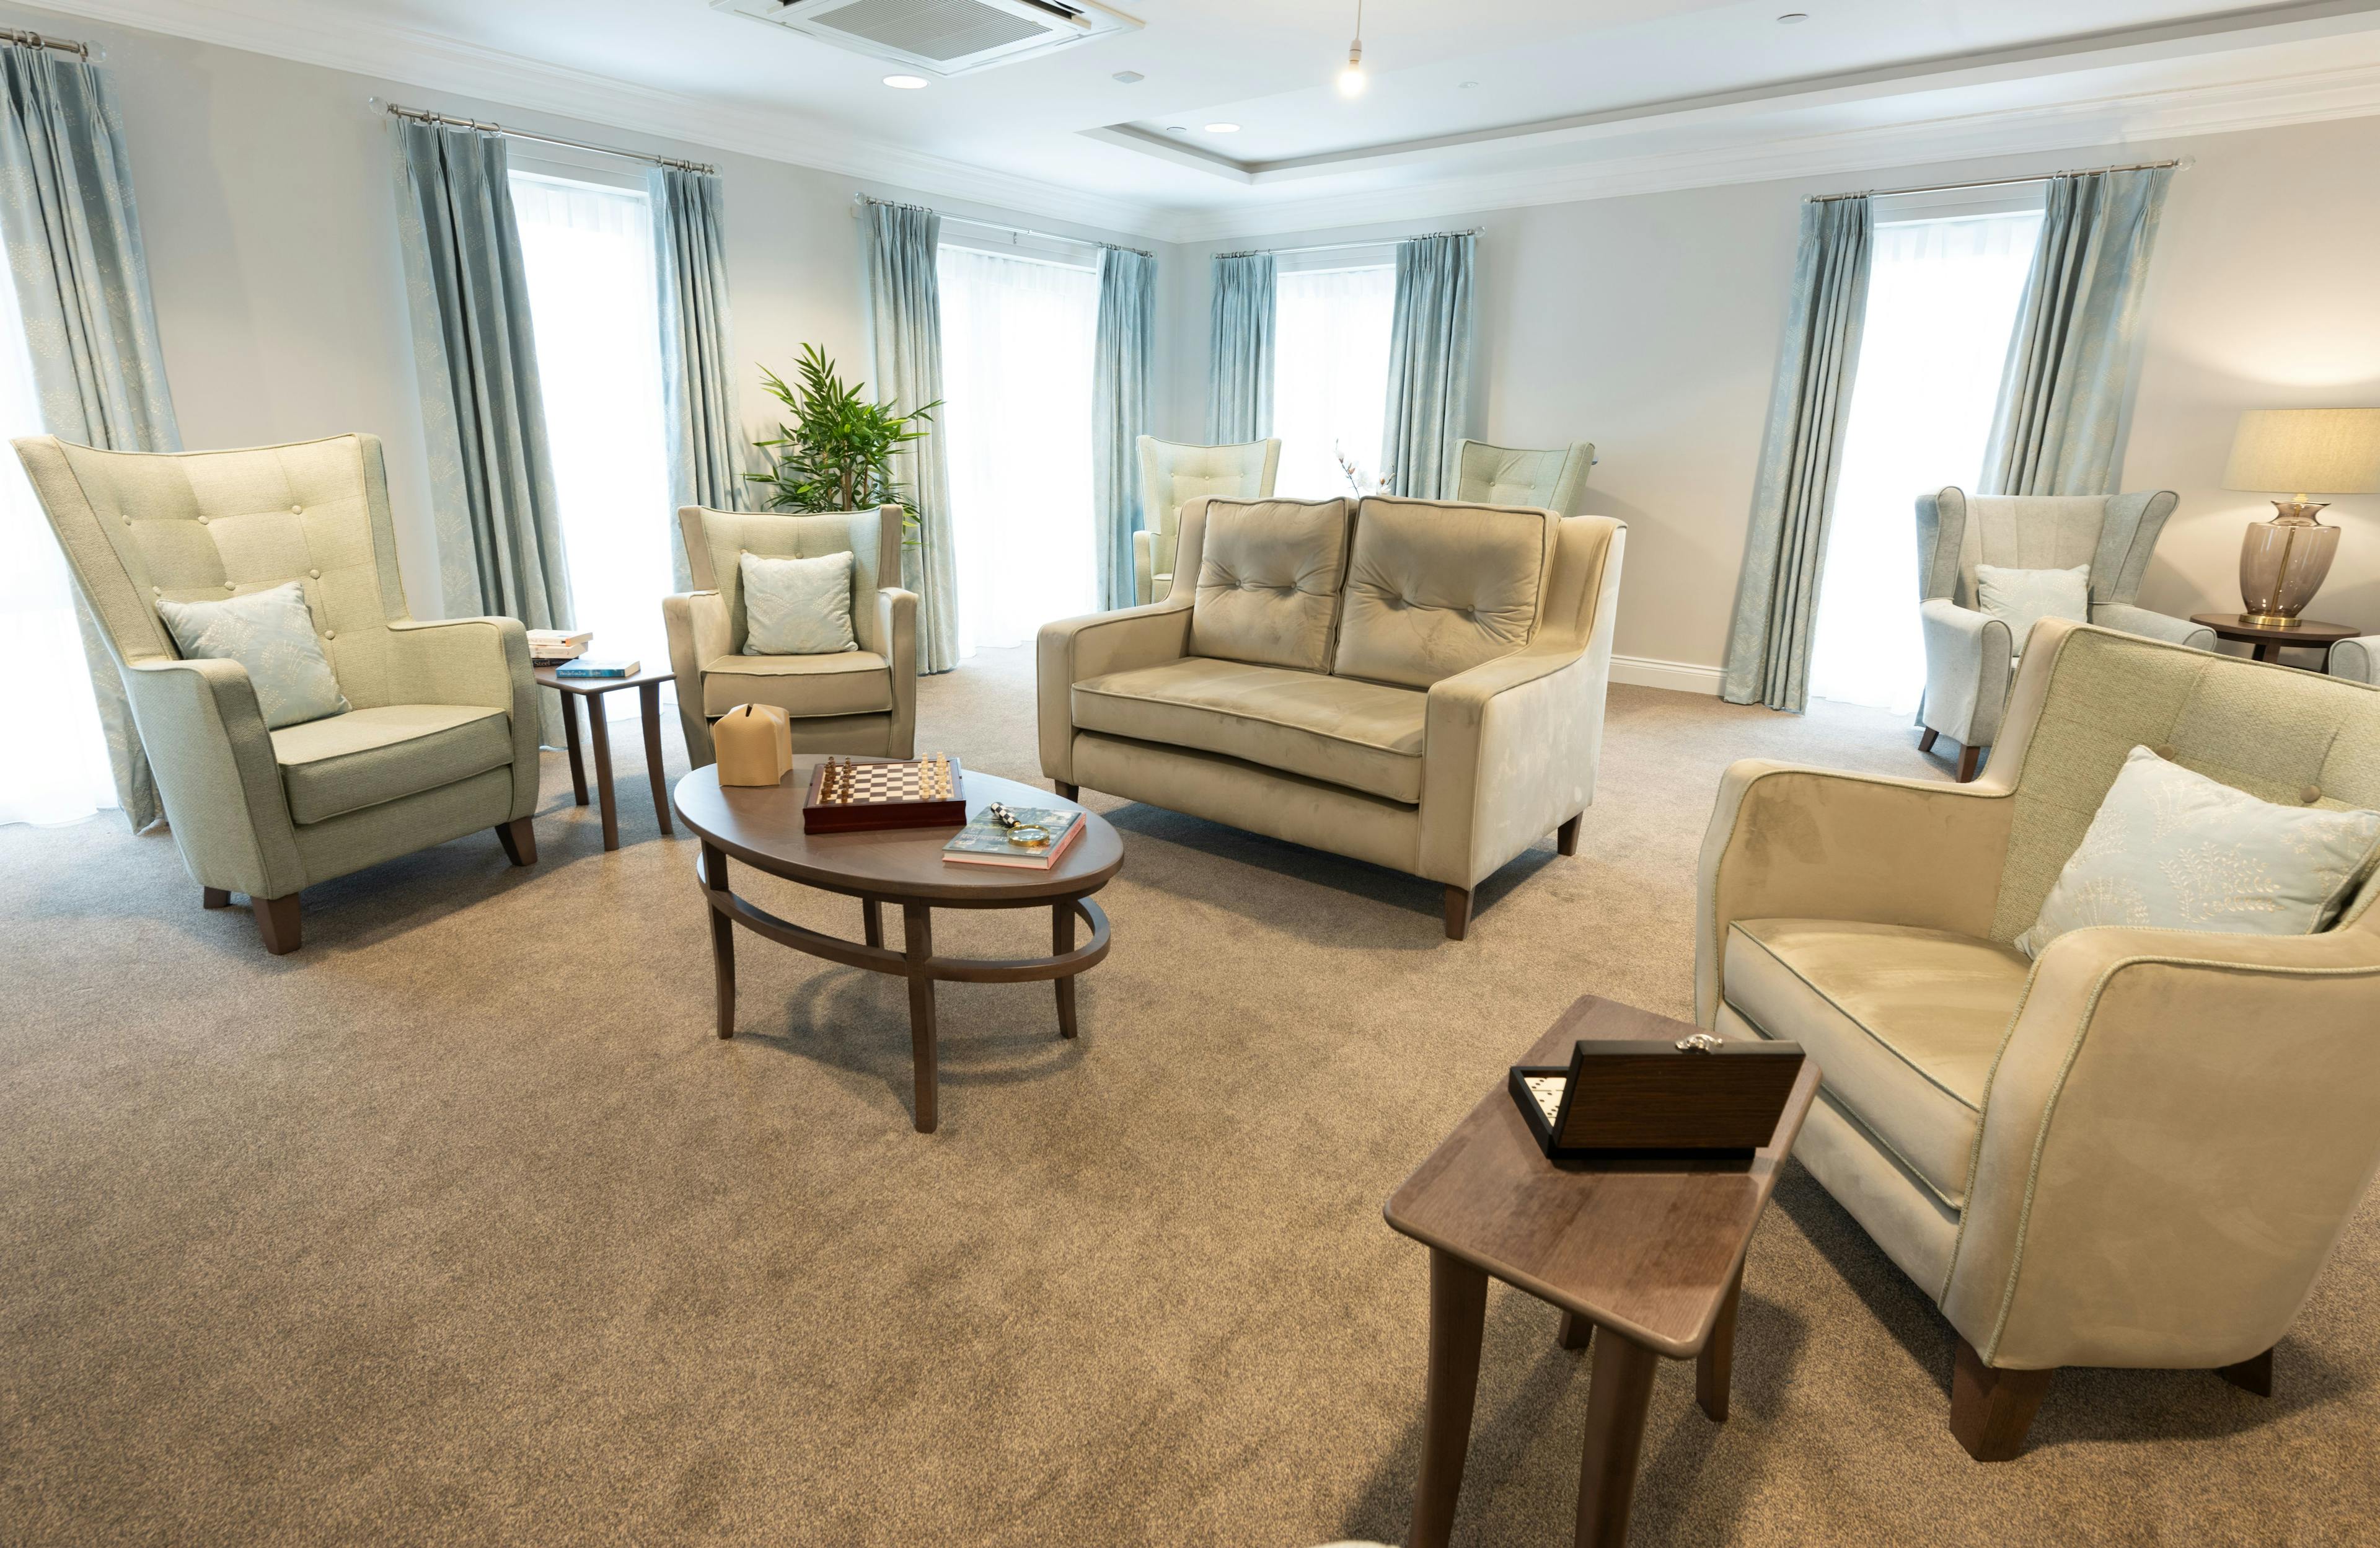 Lounge of Astley View care home in Chorley